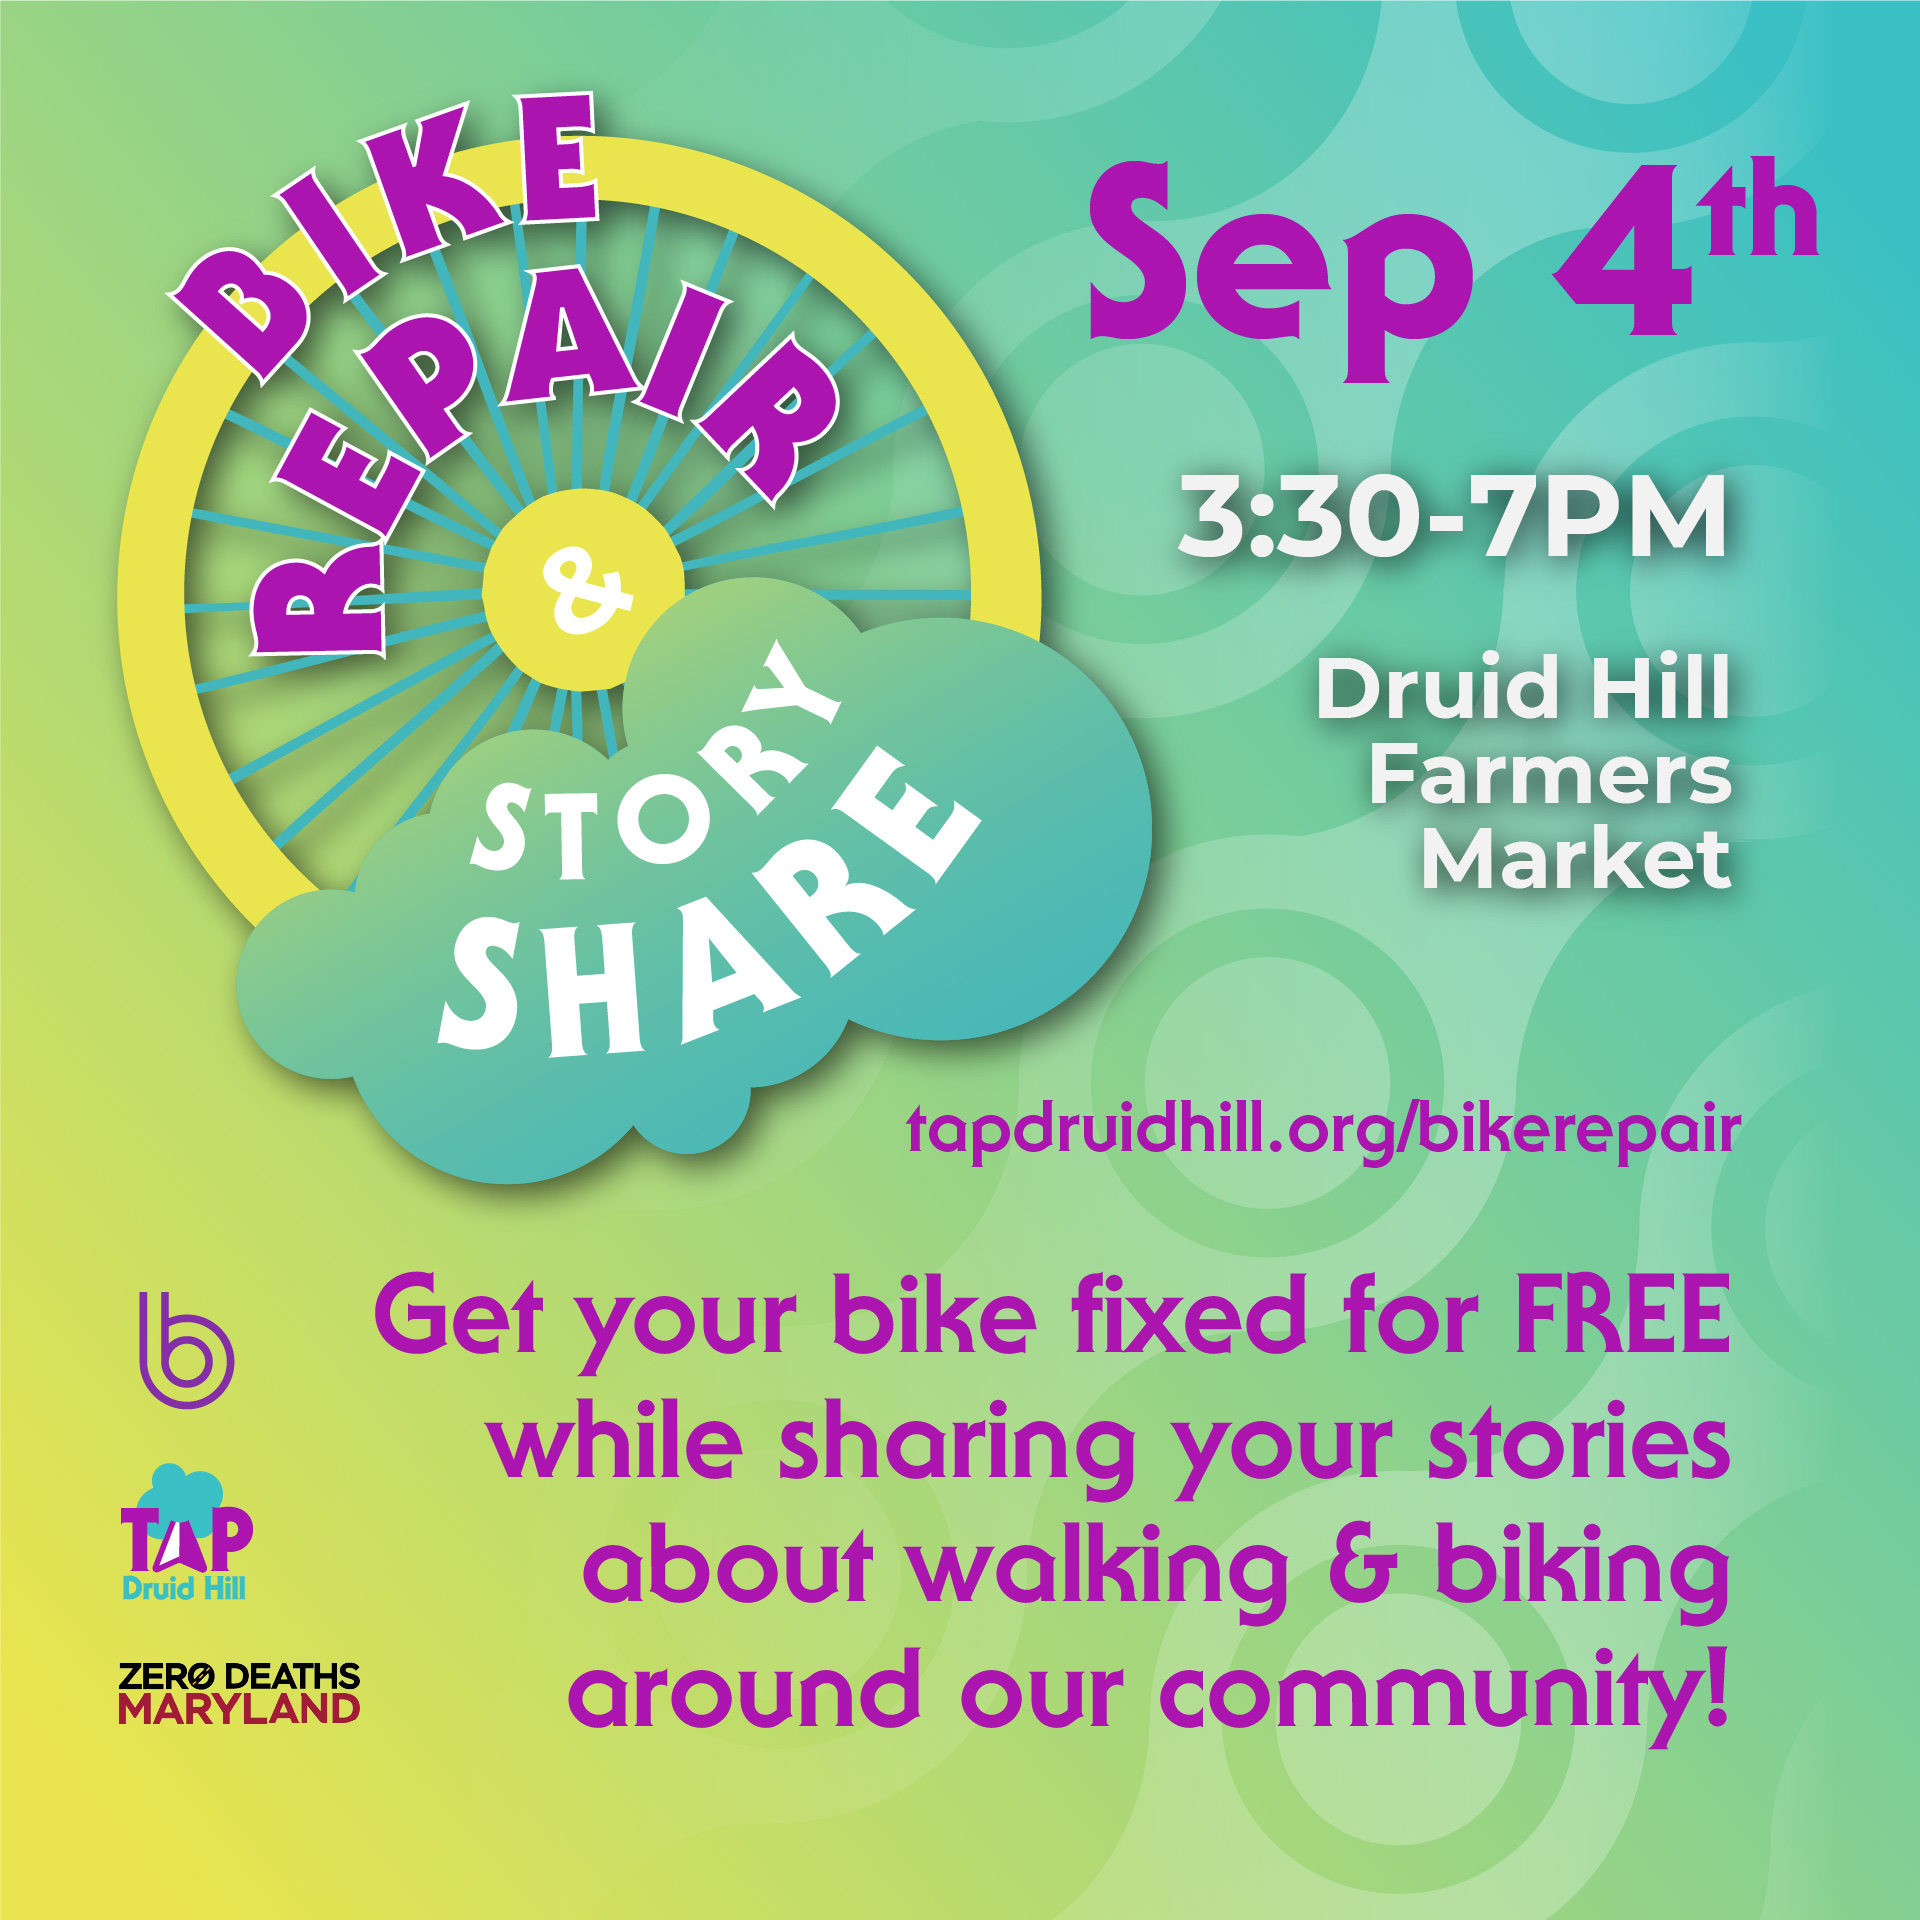 Bike Repair & Story Share banner inviting the readers to "Get your bike fixed for FREE while sharing your stories about walking & biking!" on September 4th, 2024 3:30-7pm at the Druid Hill Farmers Market